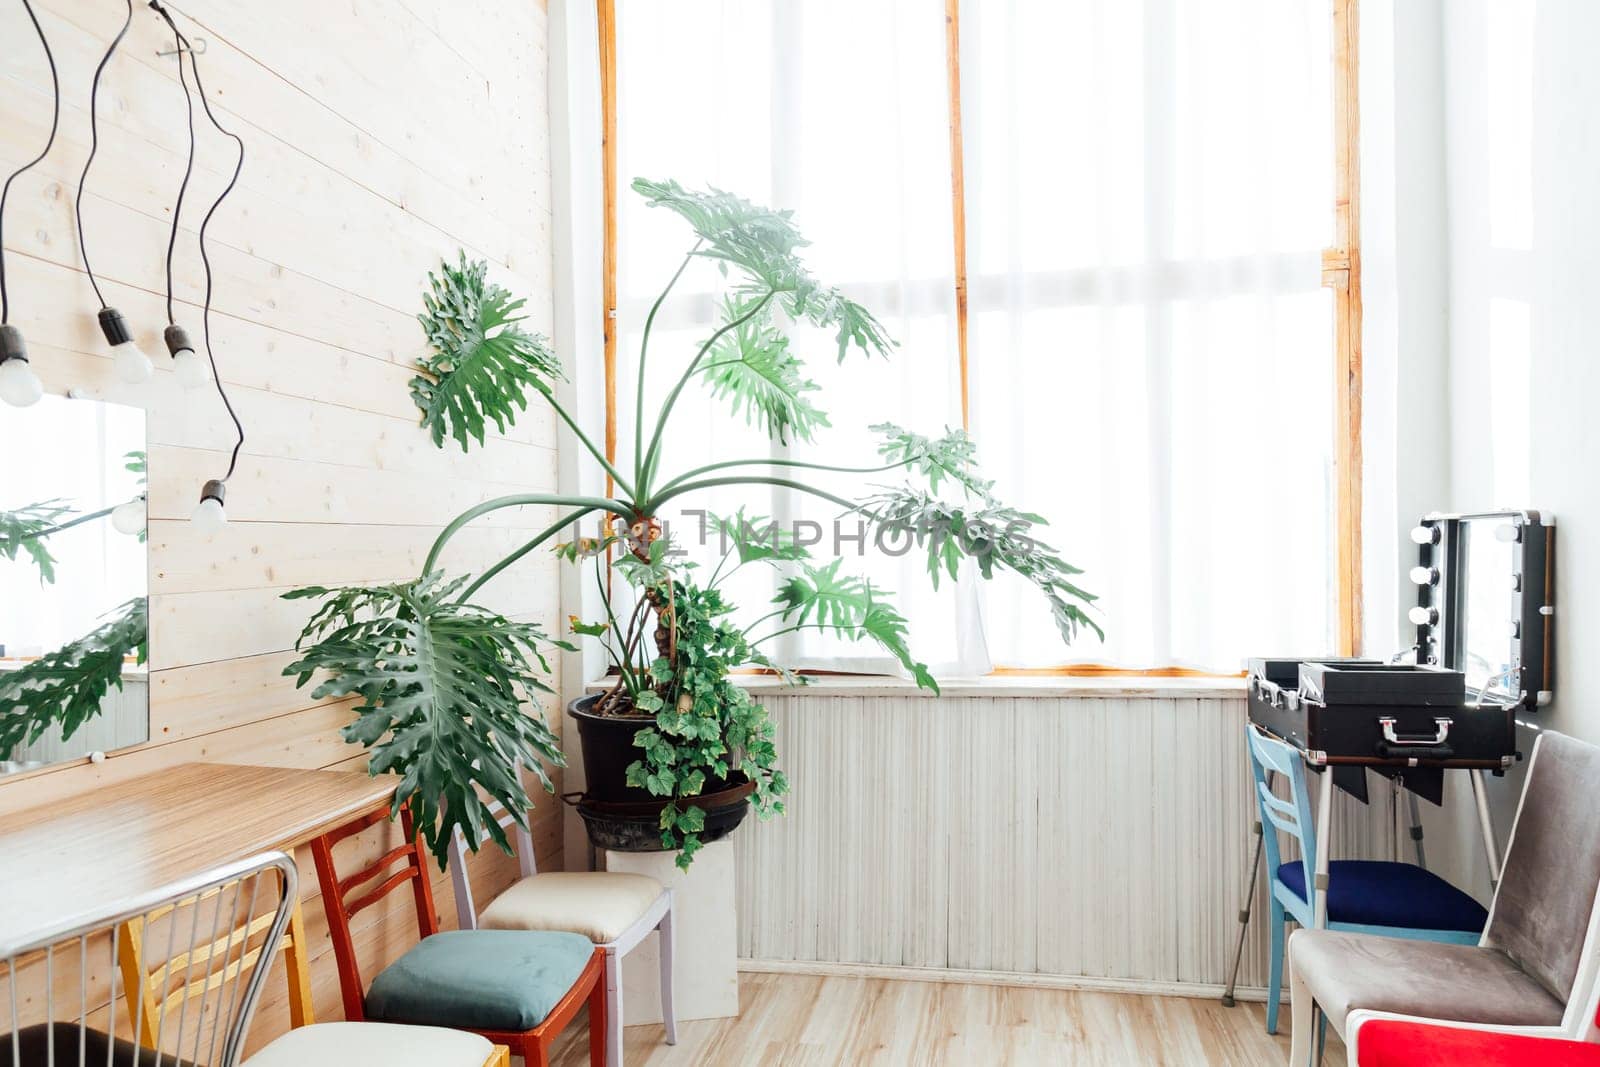 green house plant in the interior of the make-up dressing room by Simakov